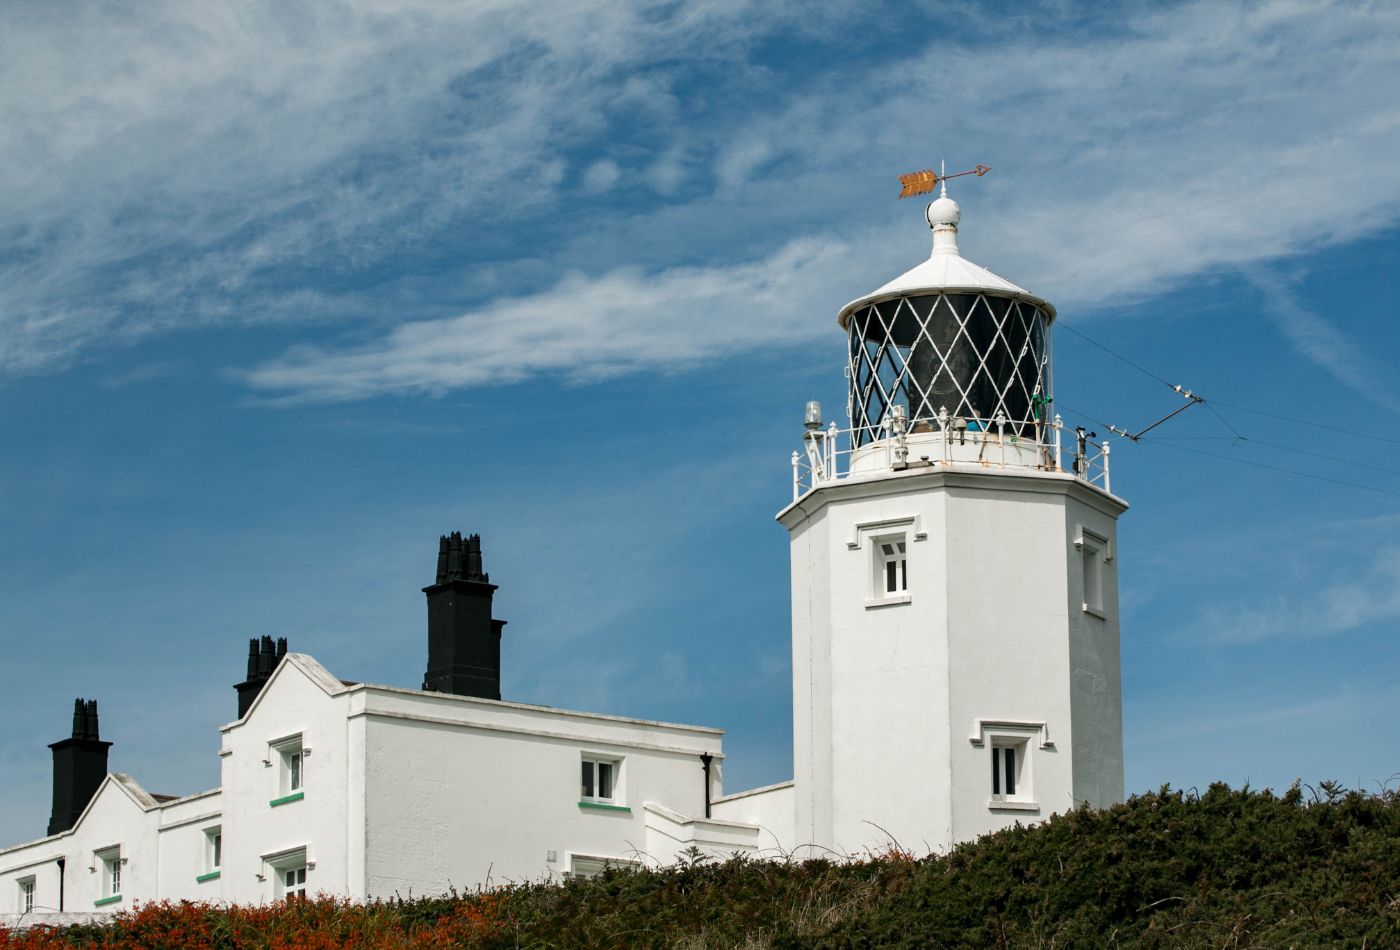 Outside view of Lizard Lighthouse against a blue sky